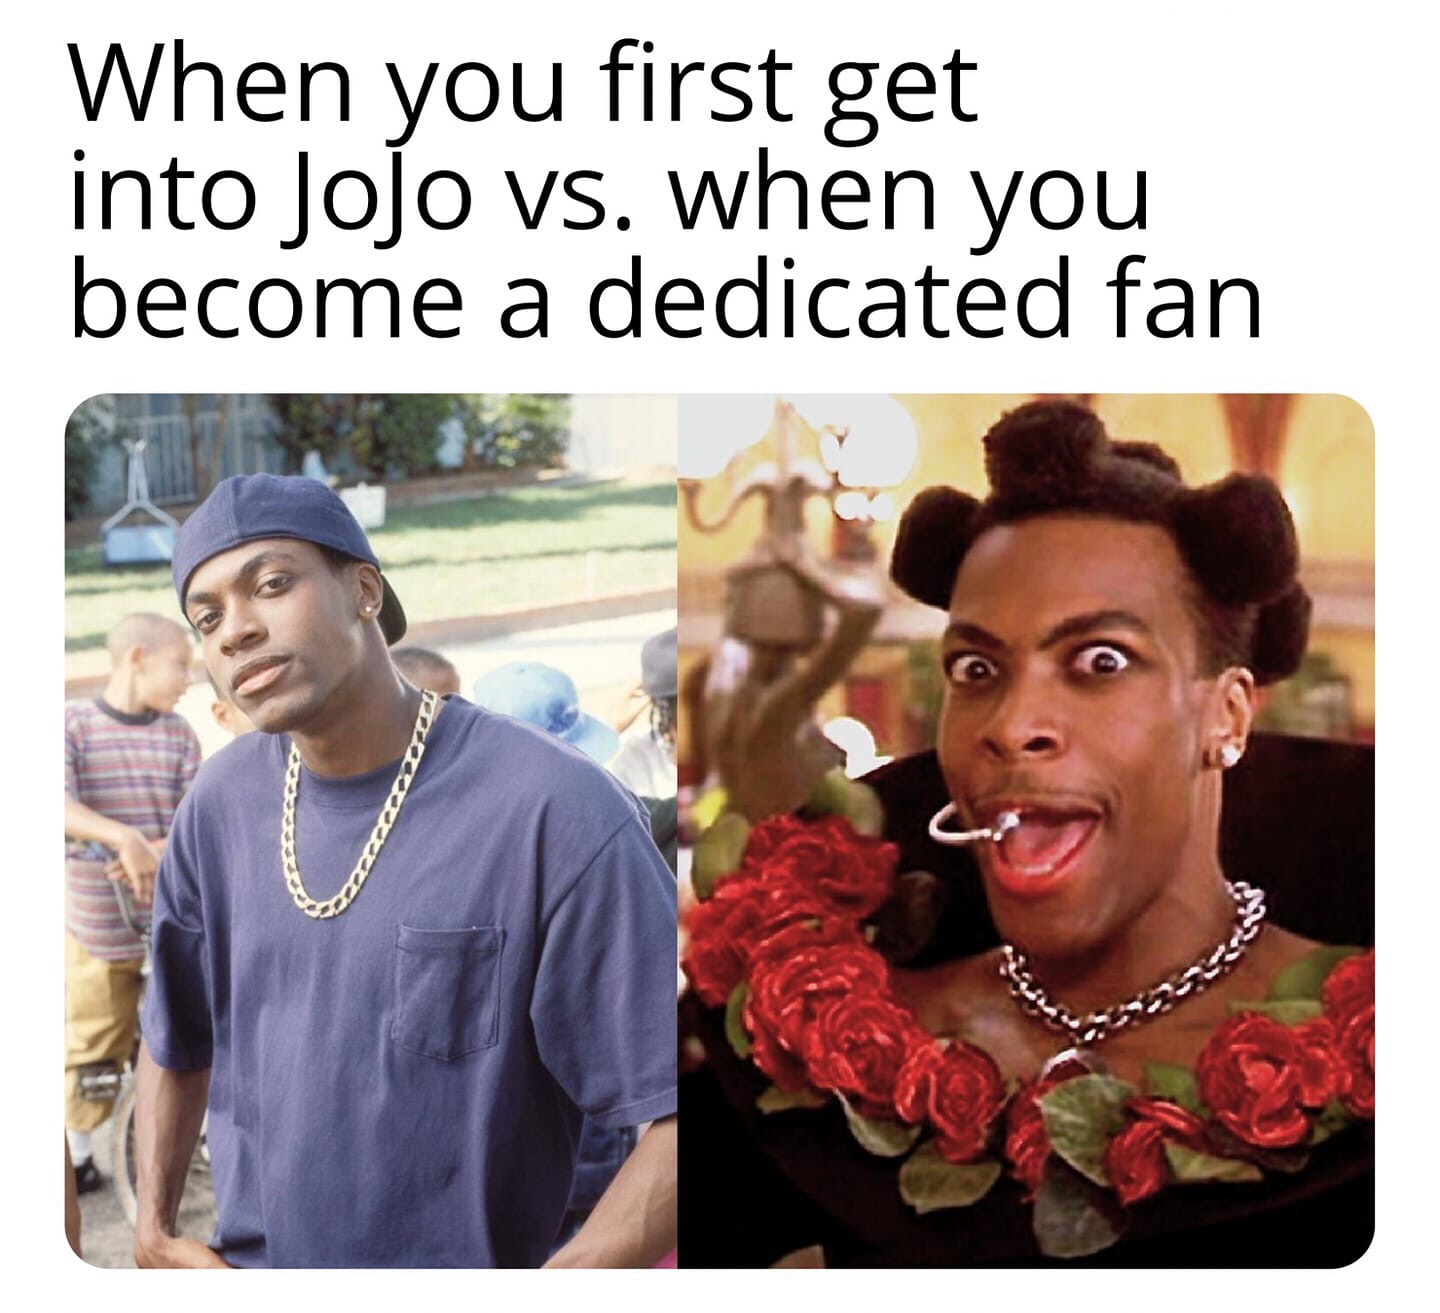 photo caption - When you first get into Jojo vs. when you become a dedicated fan